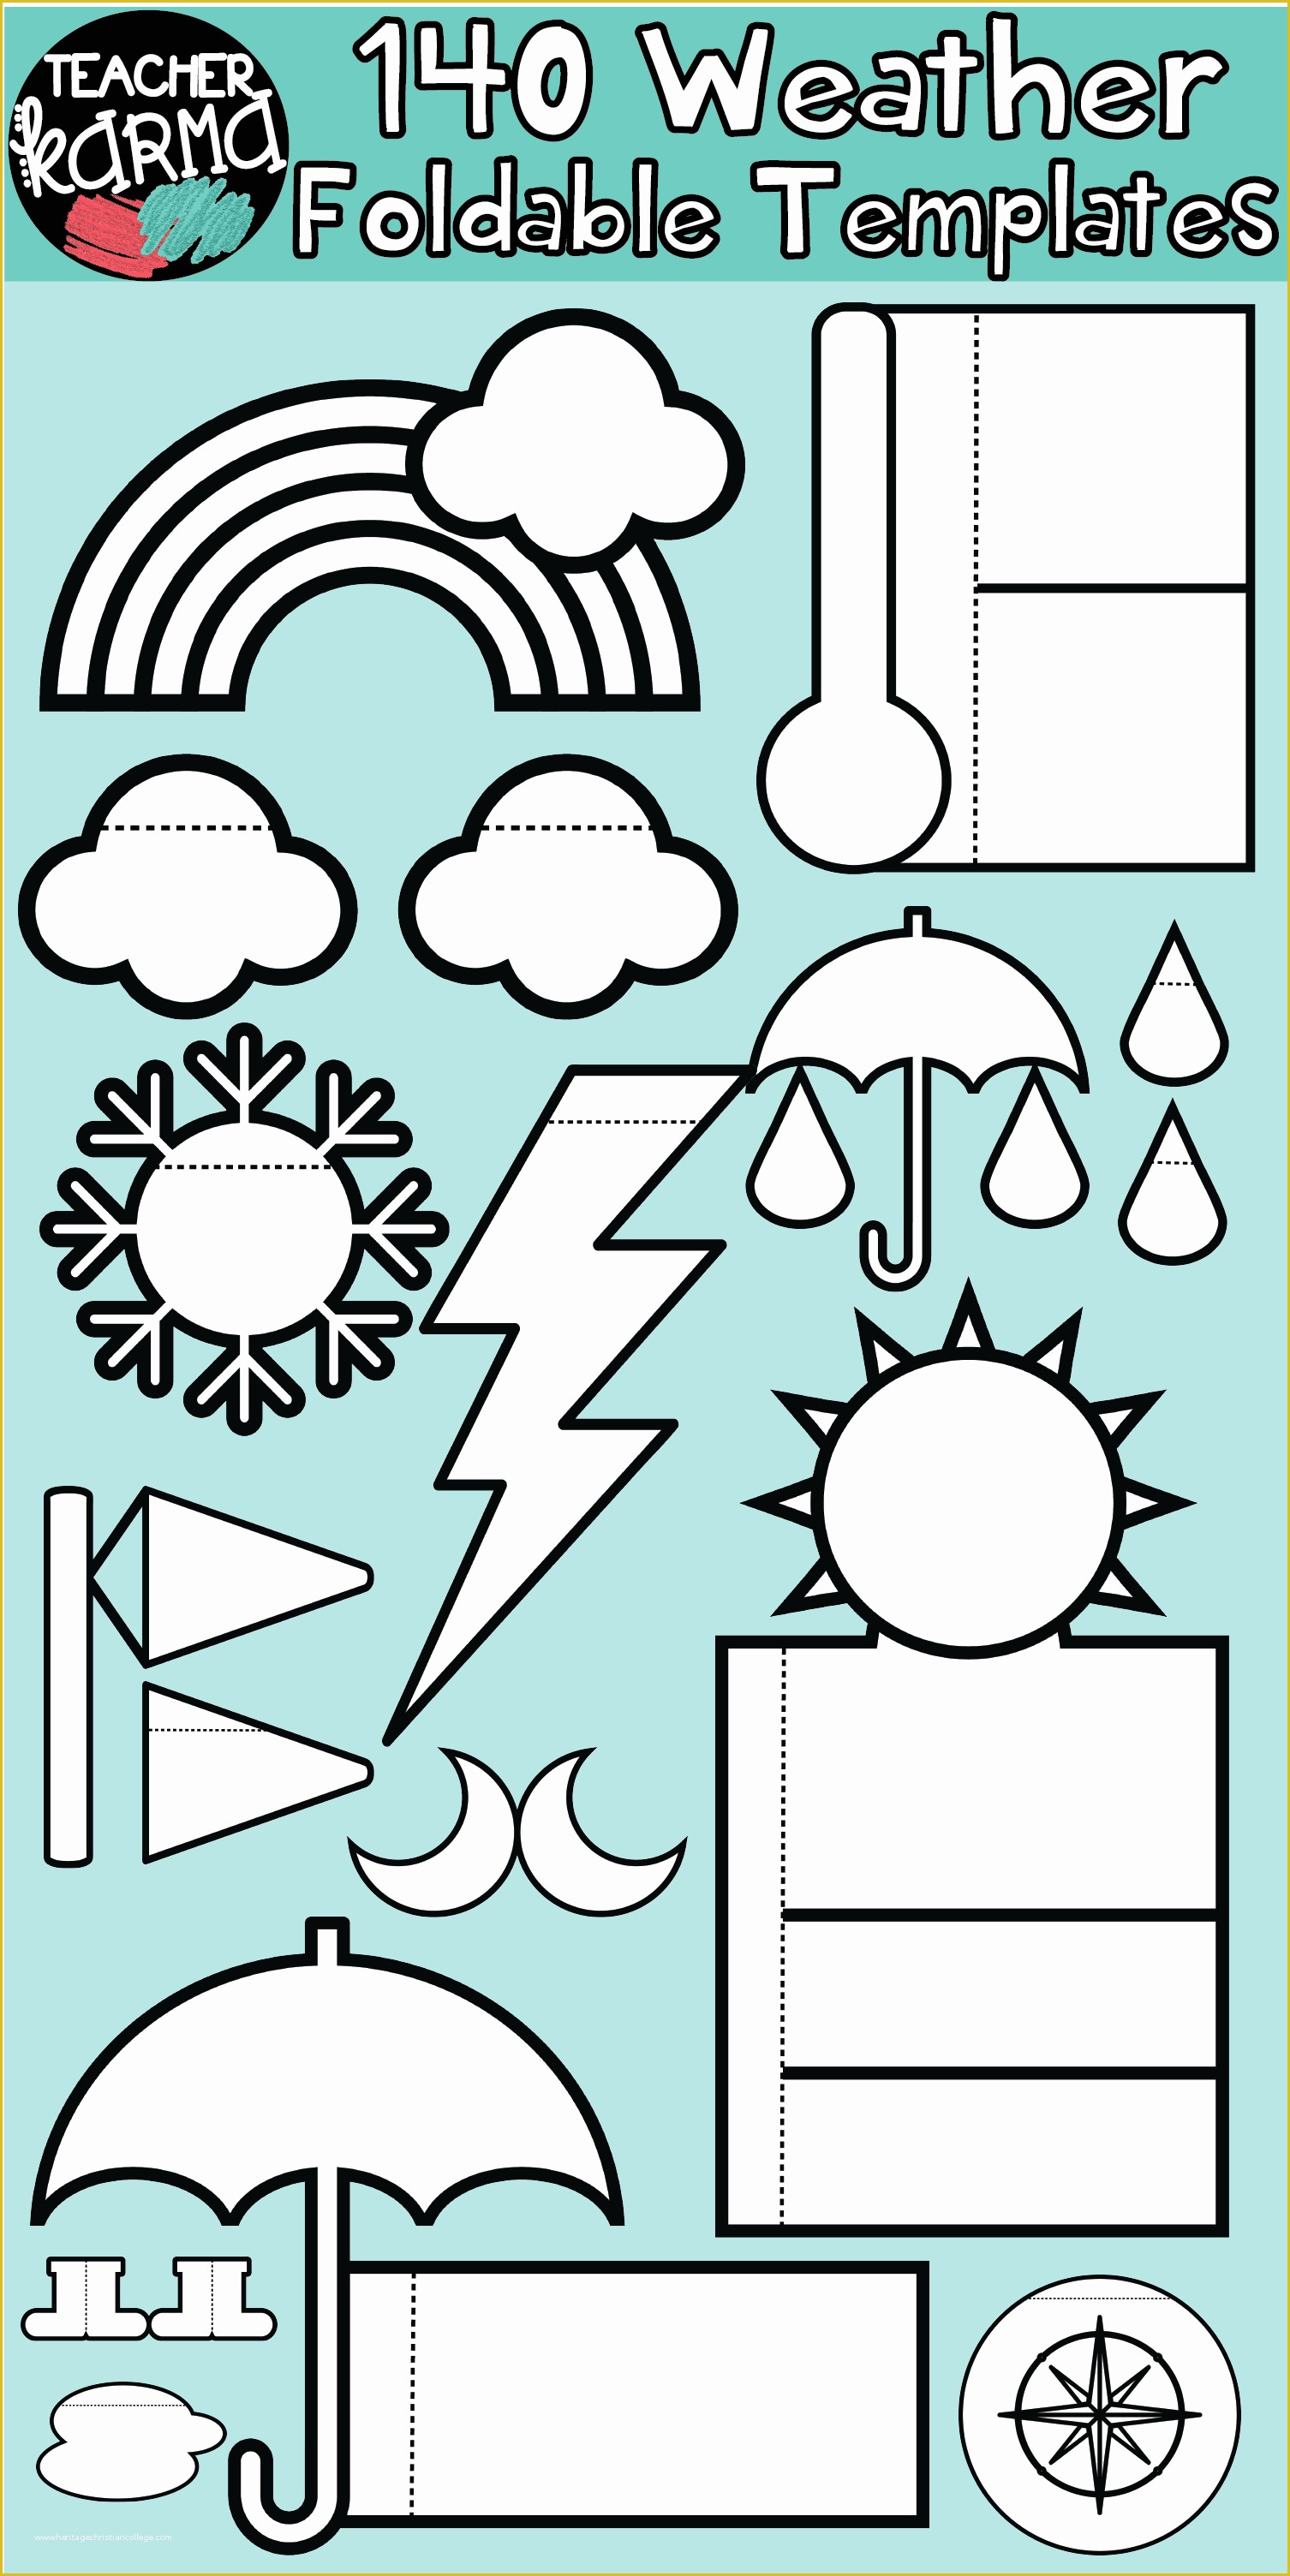 Free Flip Book Template for Teachers Of Weather 140 Foldables Interactives Flip Book Templates